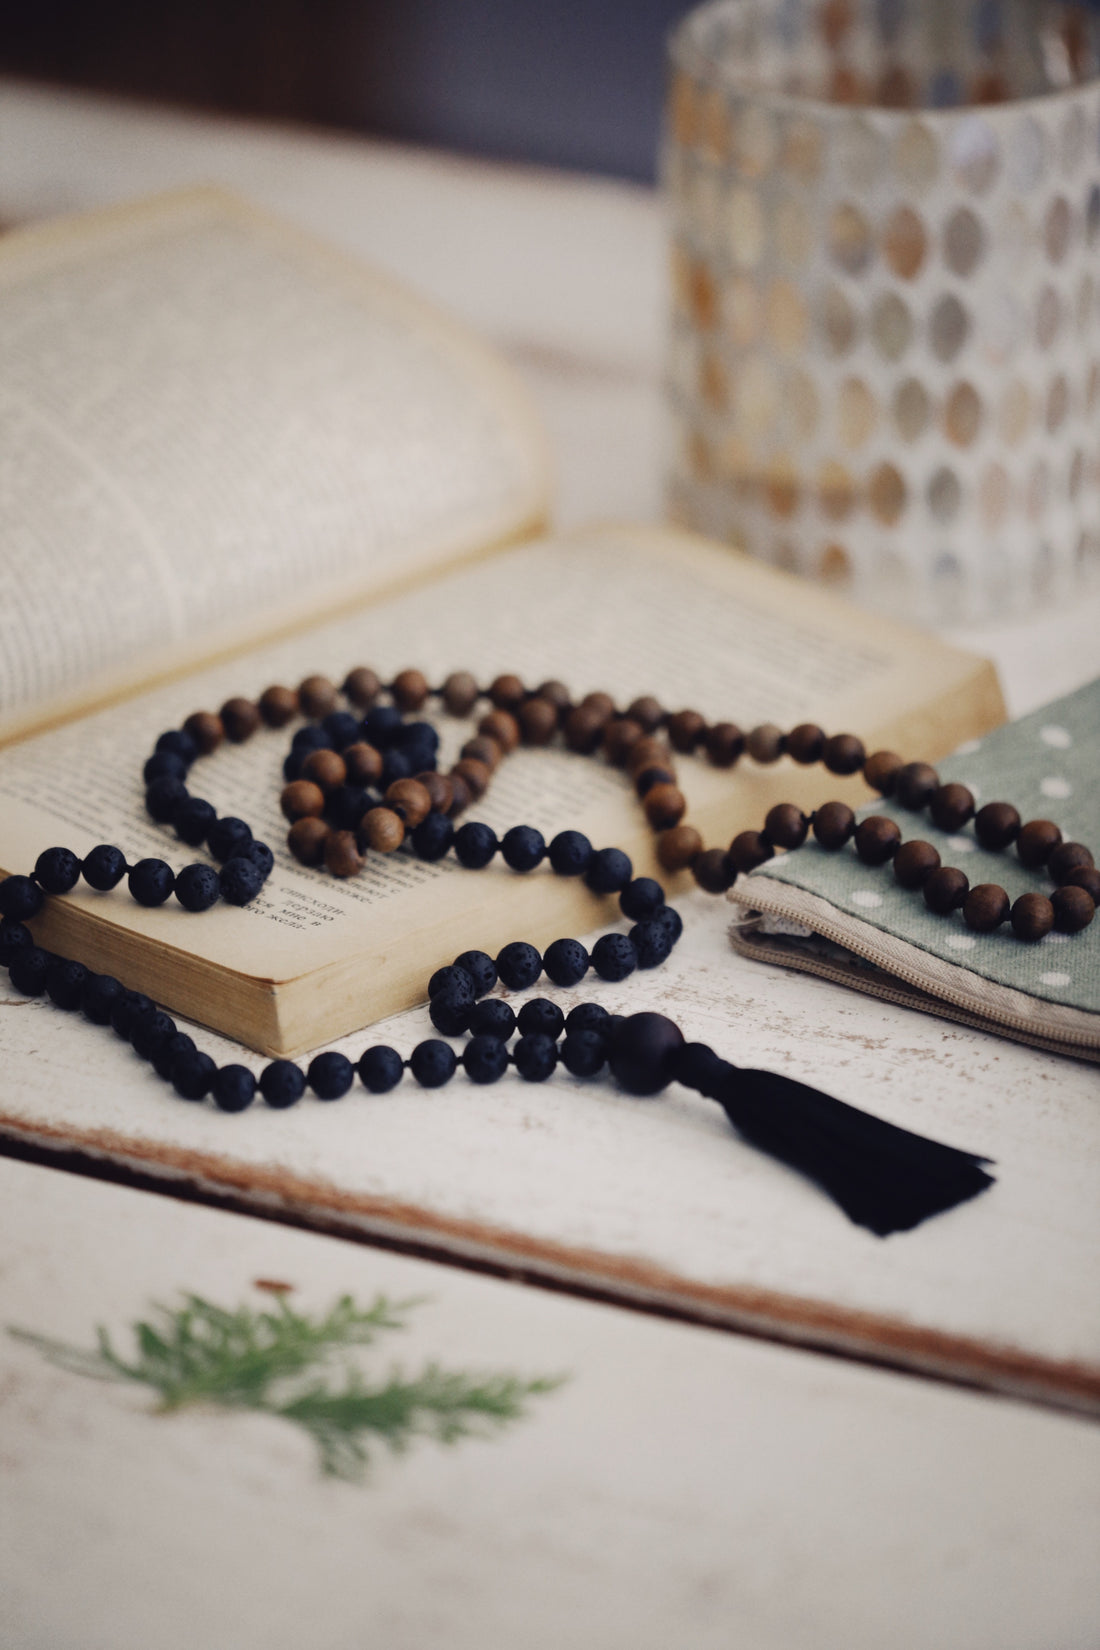 What does Breaking of the Mala Signifies?